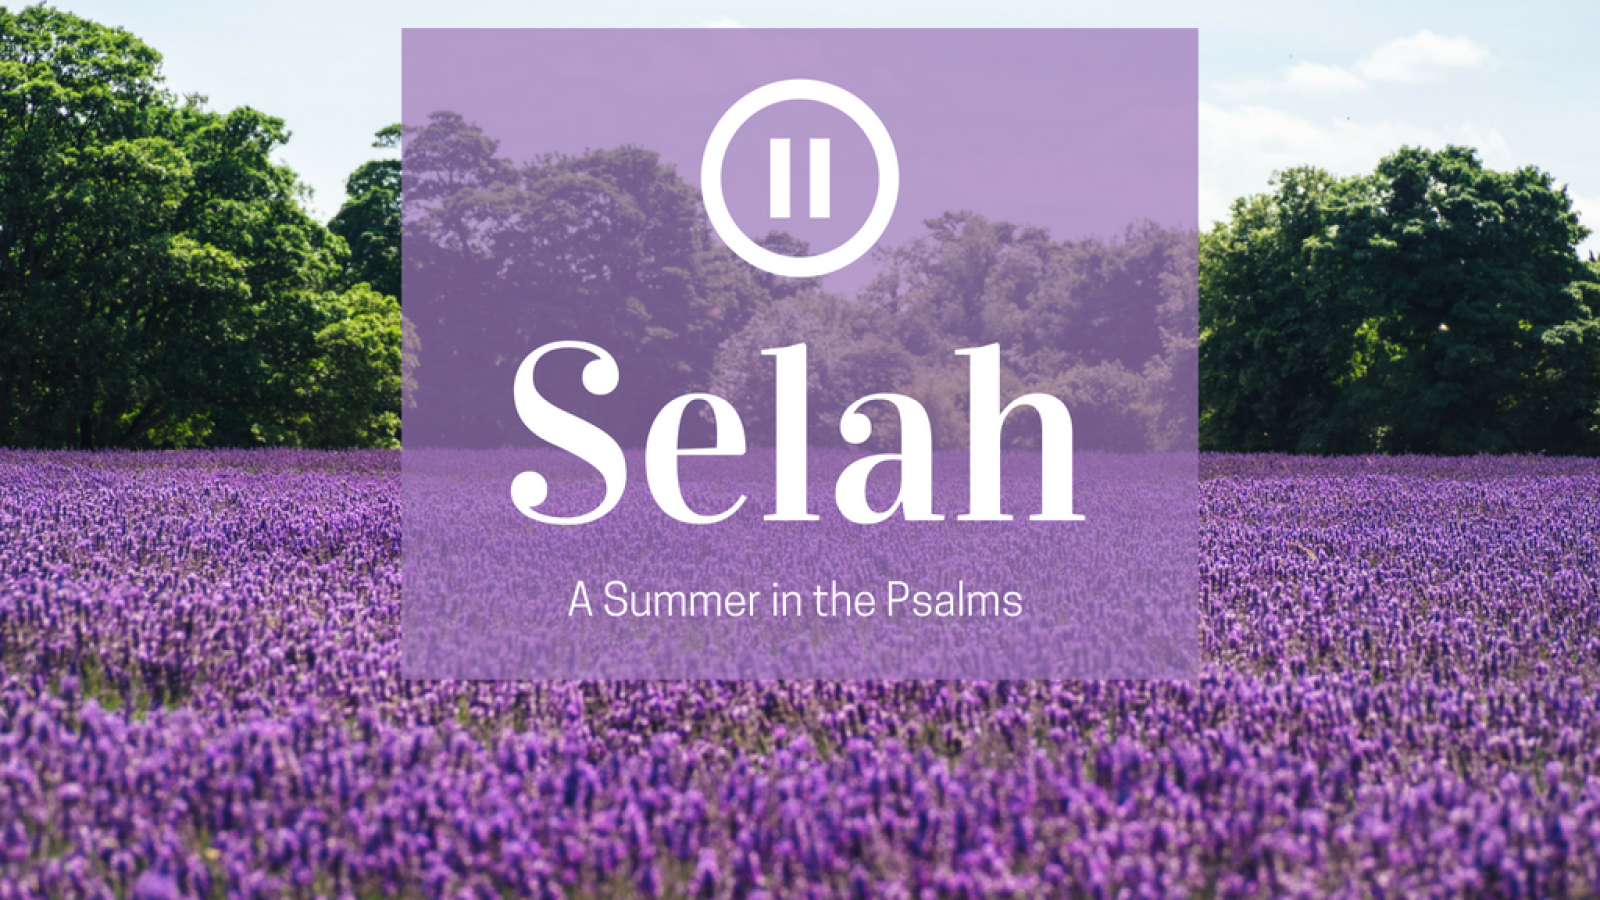 Selah: A Summer in the Psalms